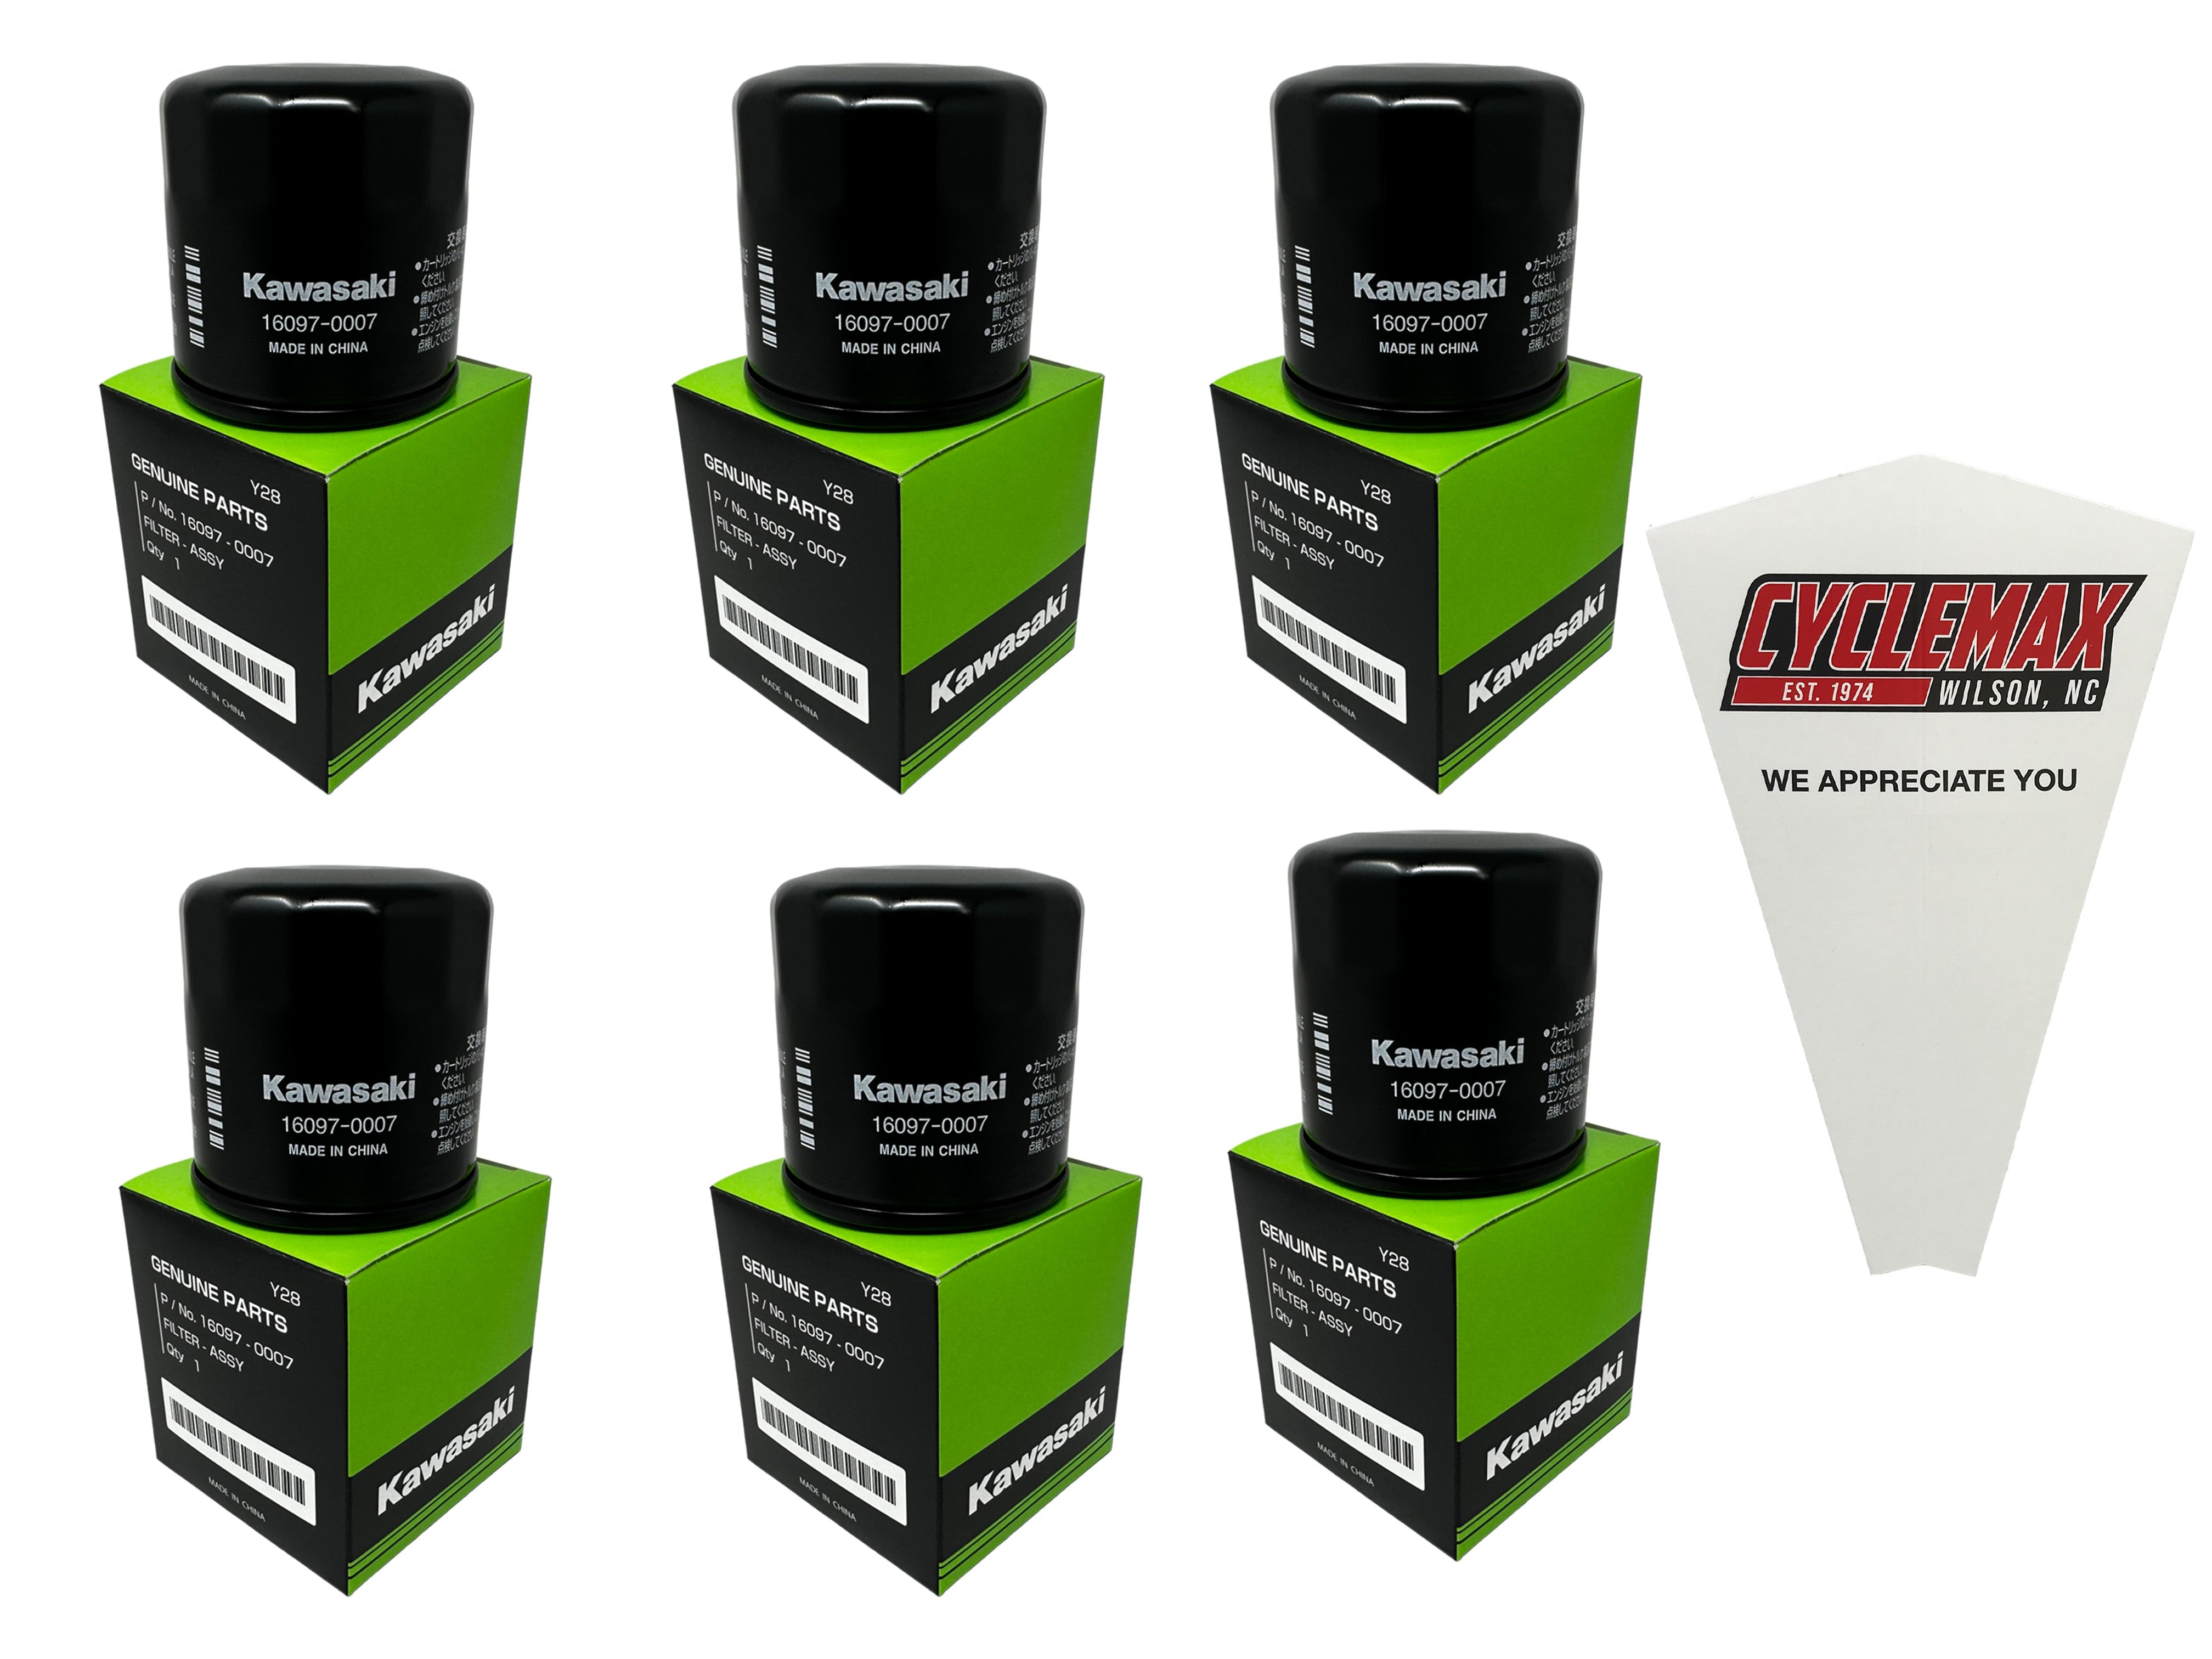 Cyclemax Six Pack for Kawasaki Oil Filter 16097-0007 Contains Six Filters and a Funnel